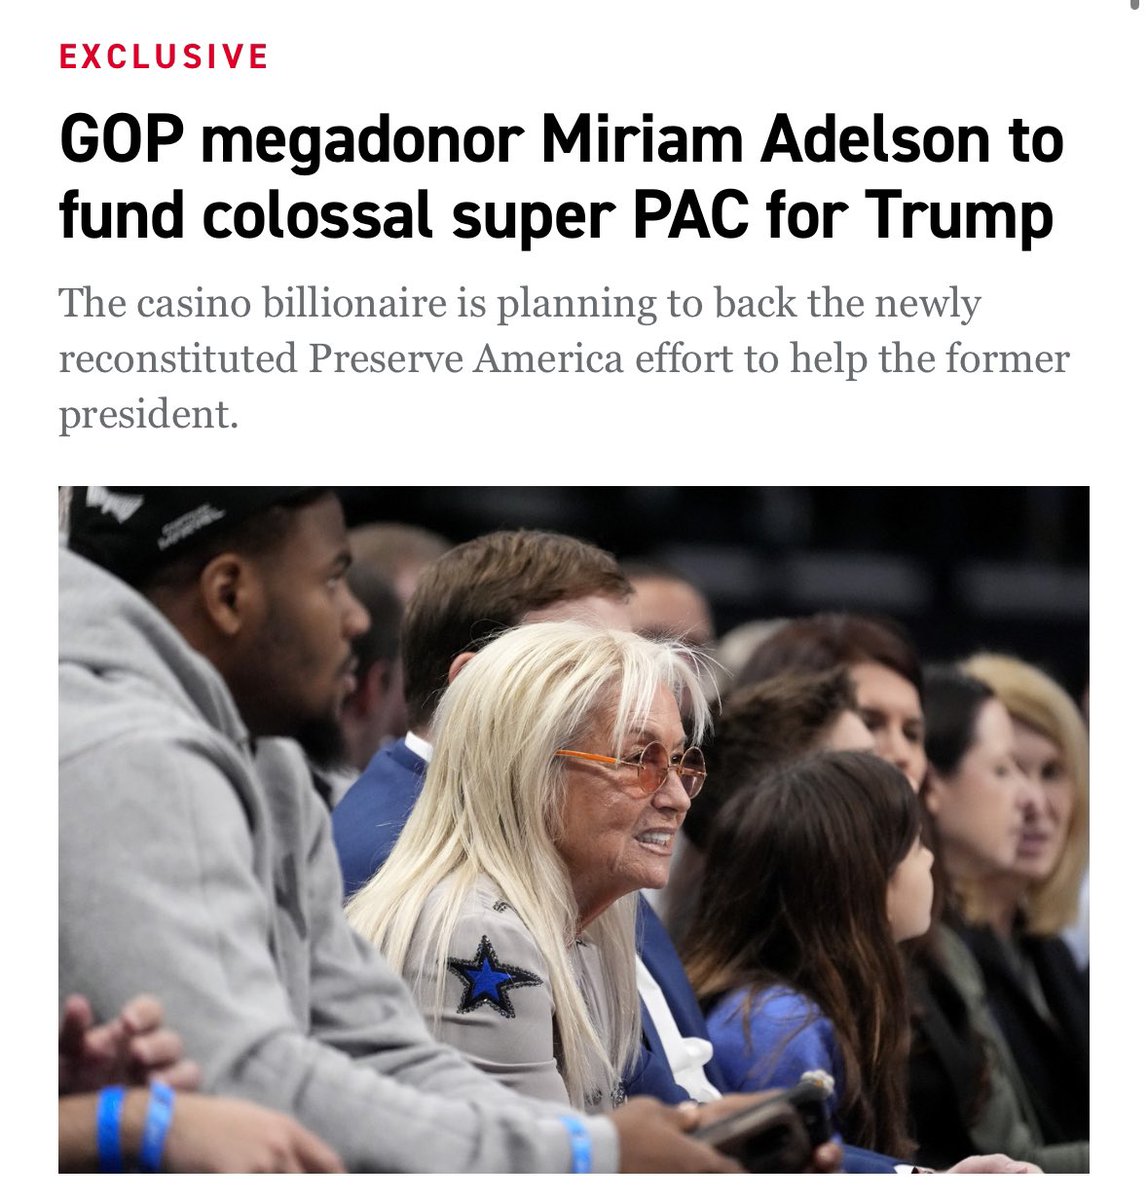 As of yesterday, Miriam Adelson is planning on contributing over $100 million to a super PAC for Trump. Billionaire Zionist Bill Ackman announced he will be flipping from Democrat to Republican to vote for Trump. Nikki Haley endorsed Trump because of his support for Israel…